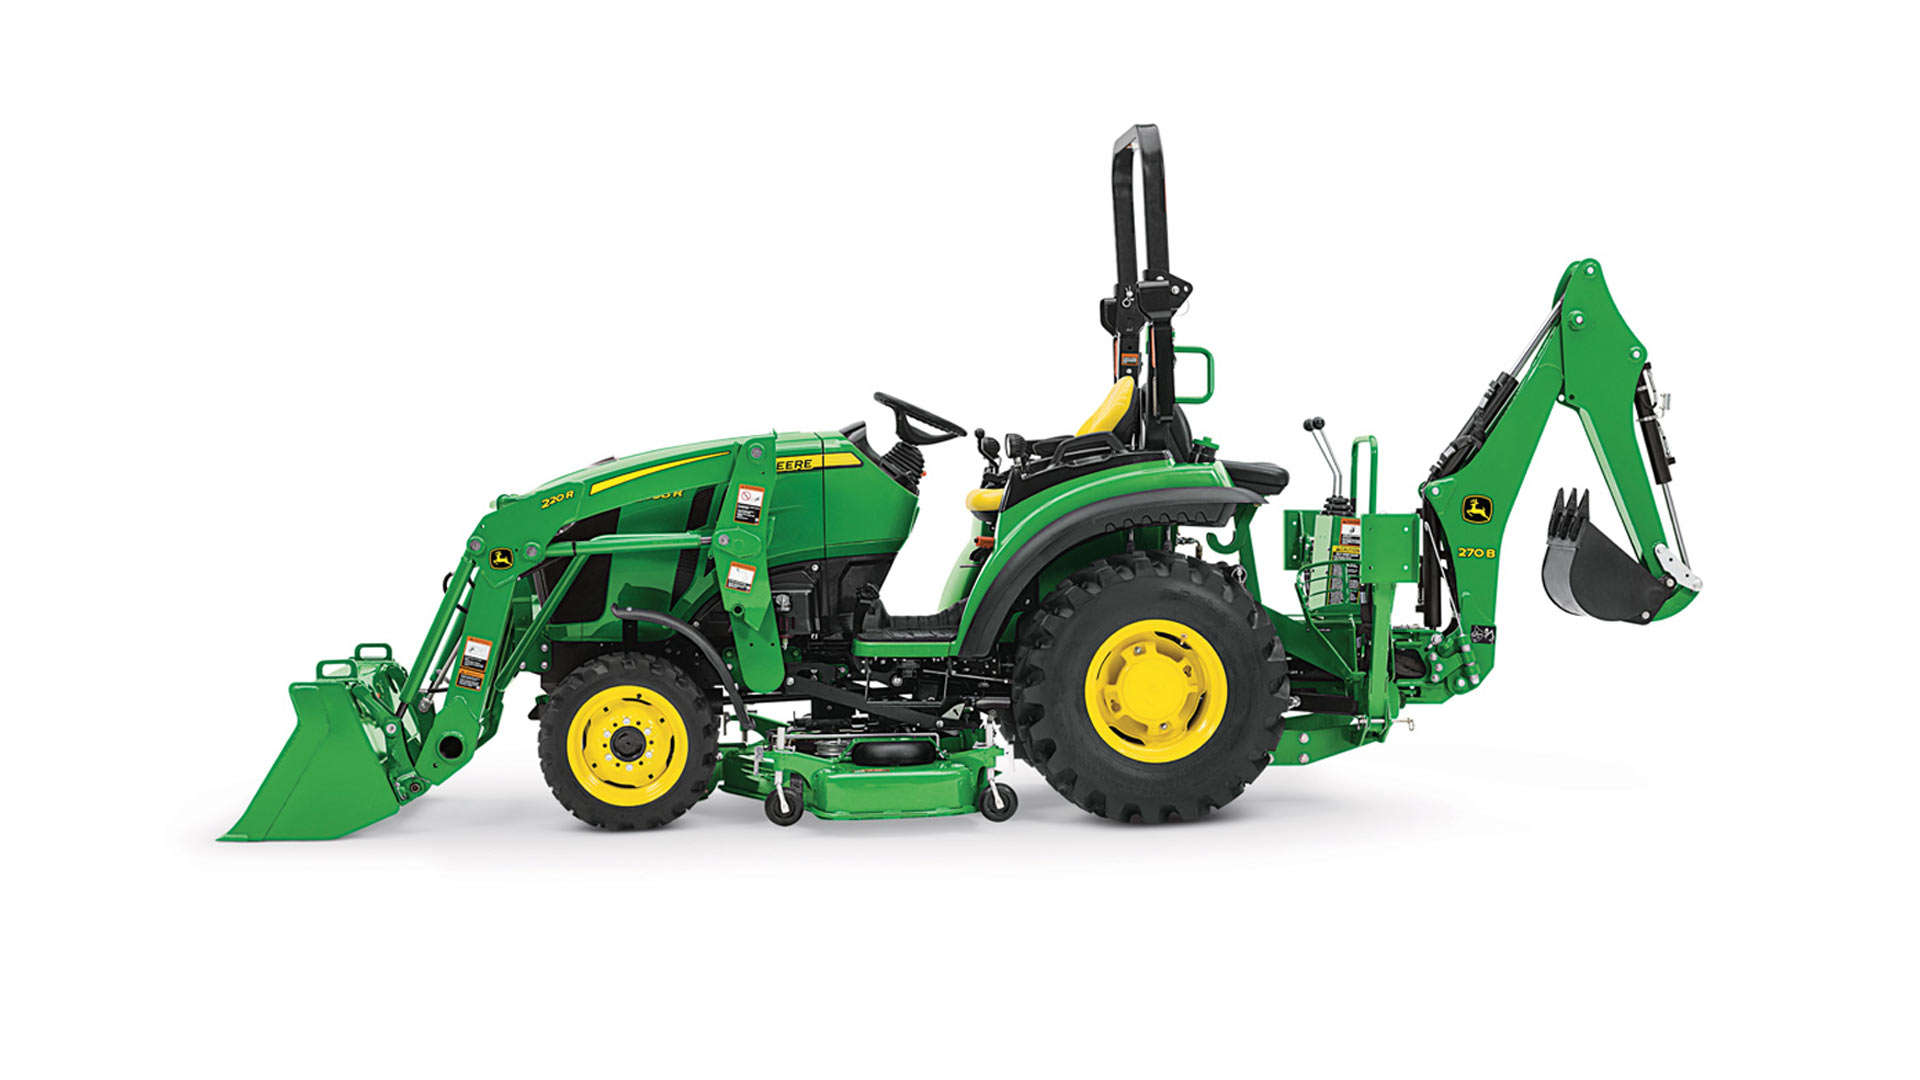 Utility Tractor Attachments & Implements | John Deere ...